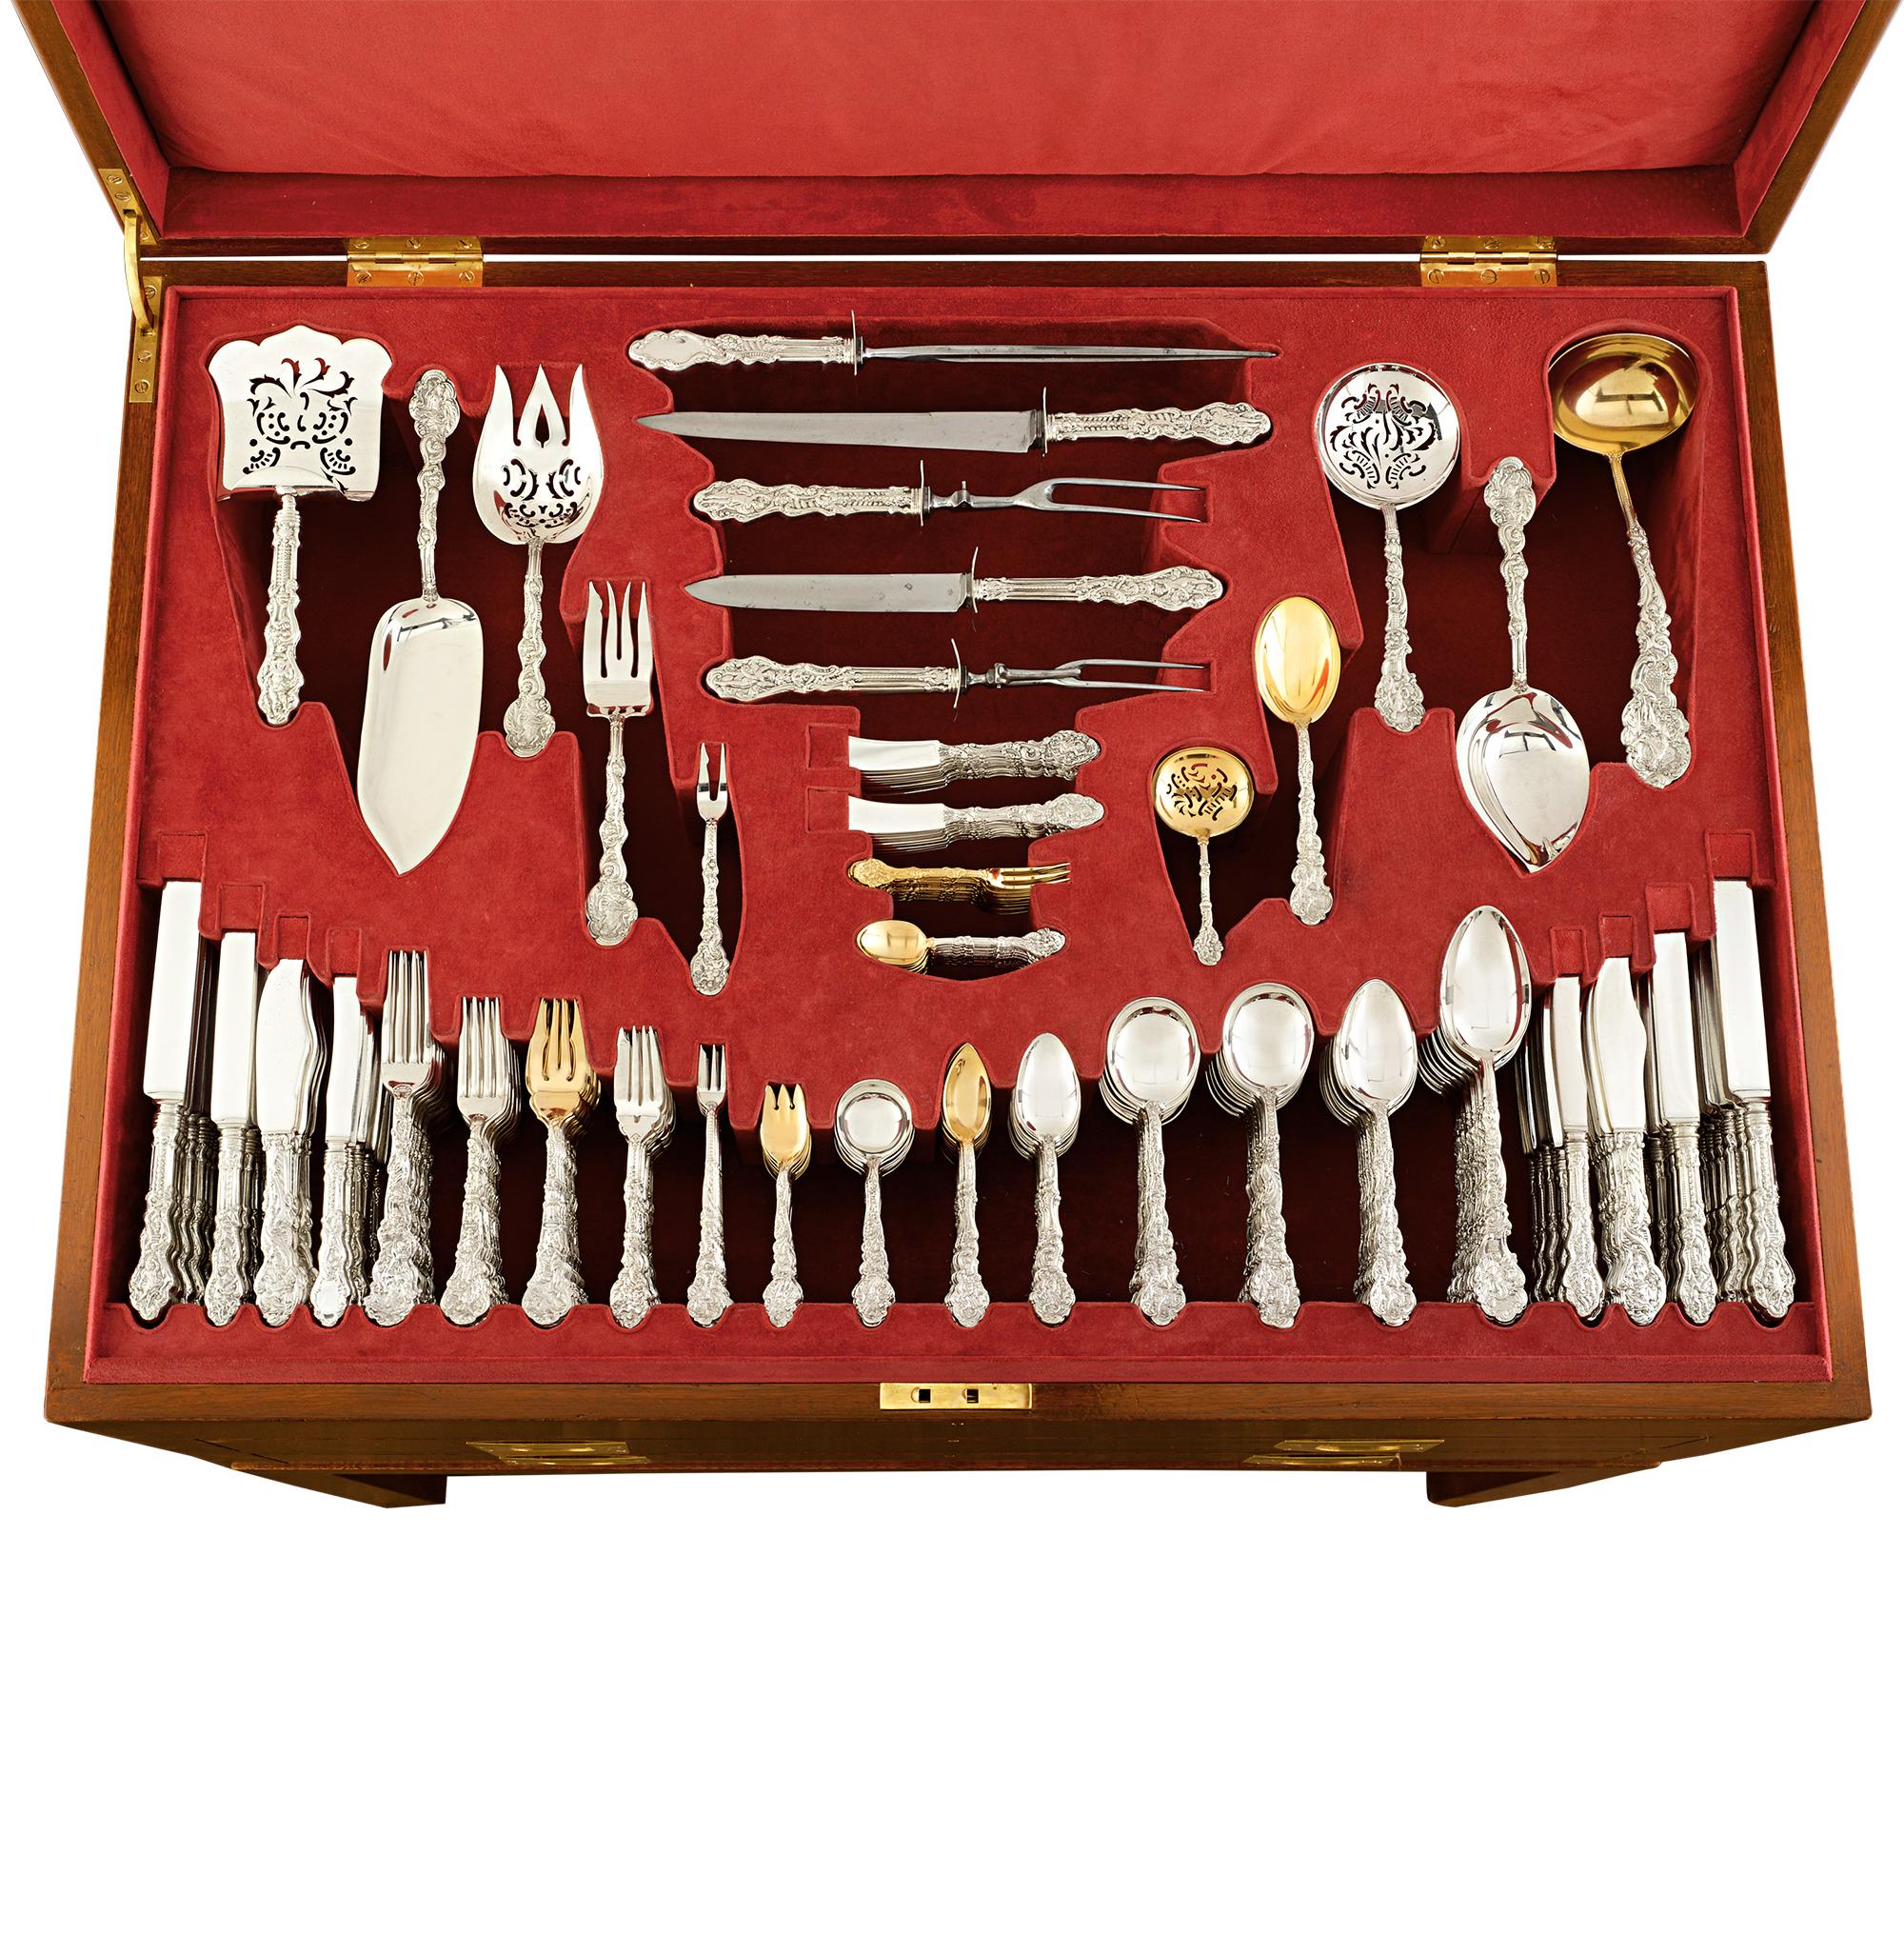 This monumental American sterling silver flatware service by Gorham epitomizes the stately glamour of turn-of-the-century dining. A total of 705 pieces in the beloved Versailles pattern comprise this extraordinary service. From the multitudinous tea